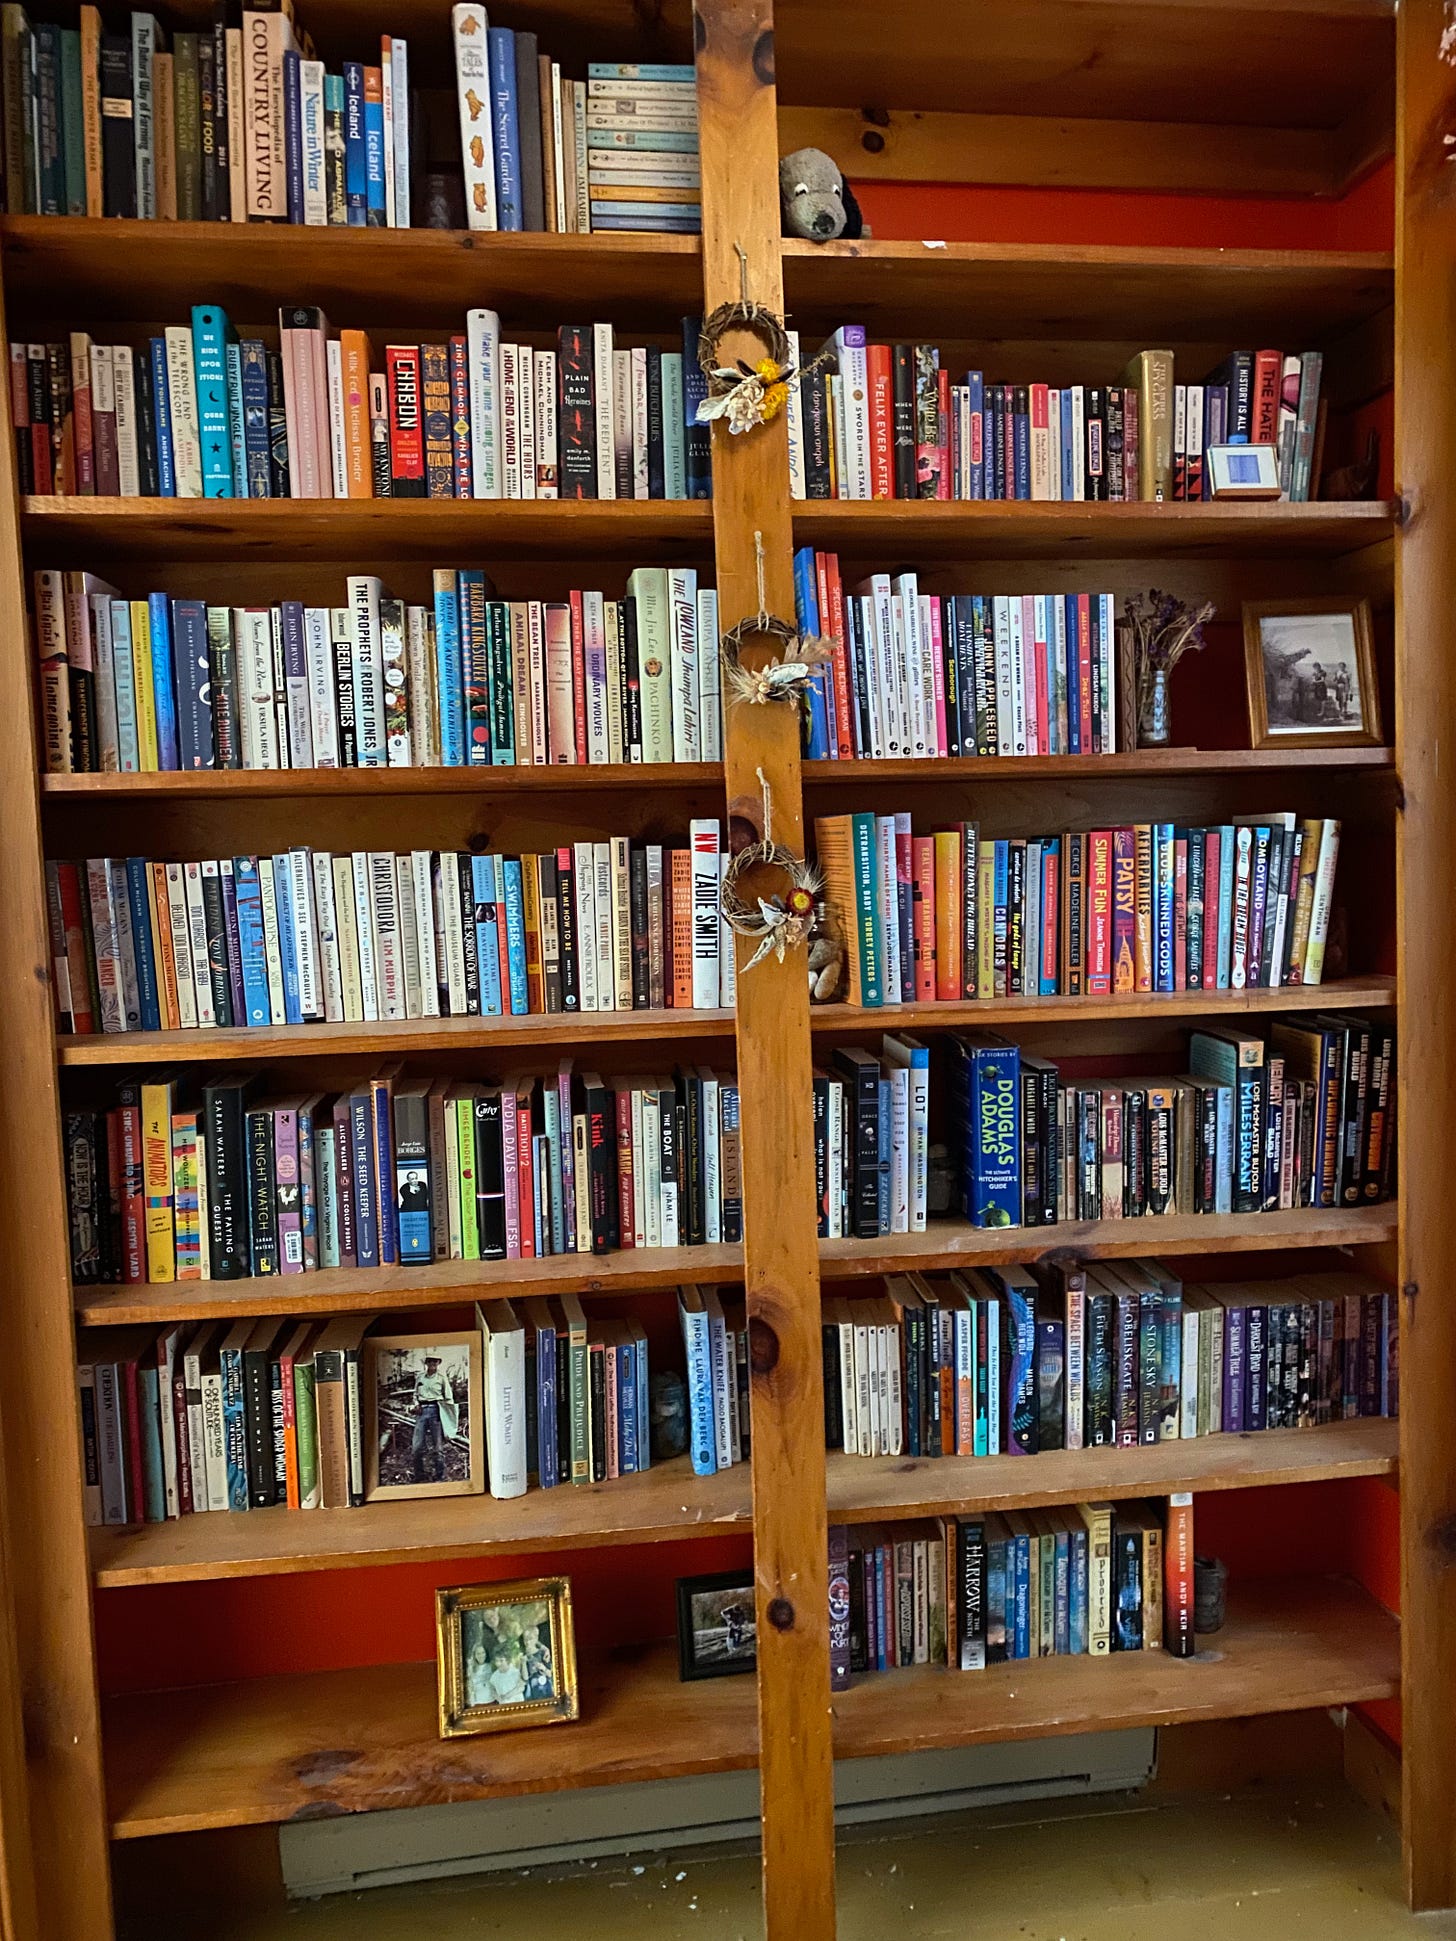 Two tall built-in bookshelves filled with books.